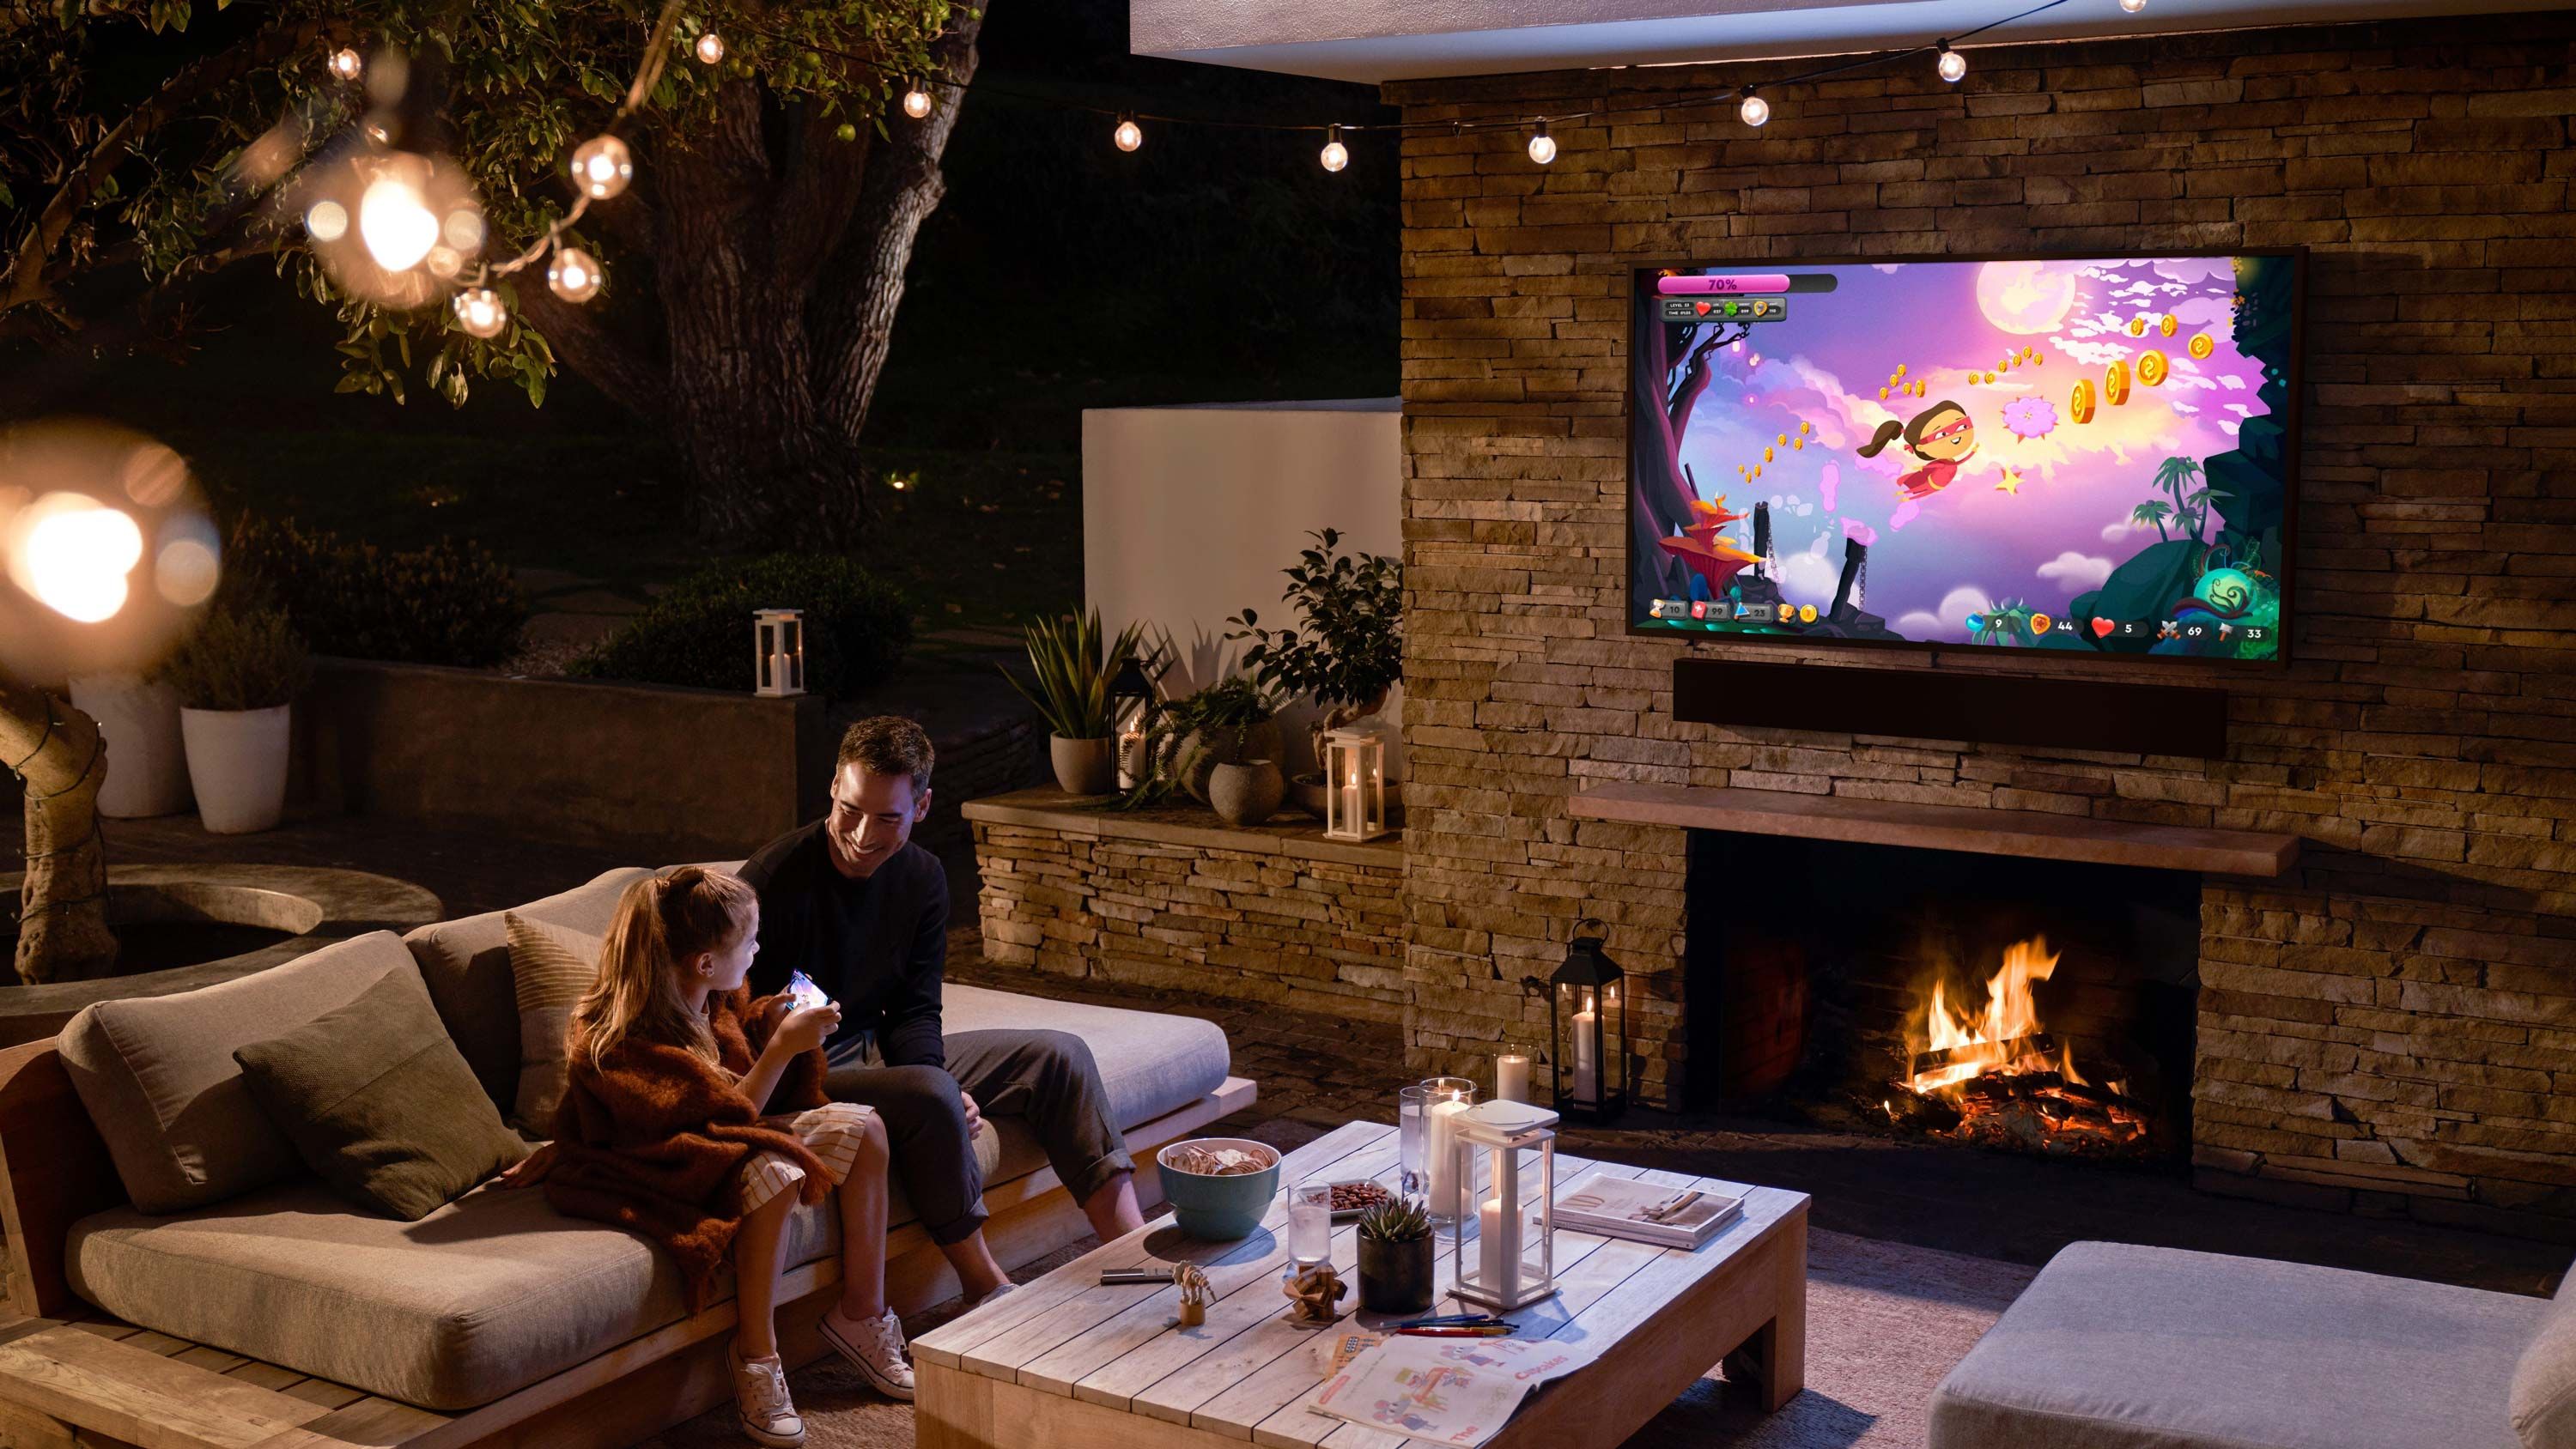 outdoor entertainment from Samsung